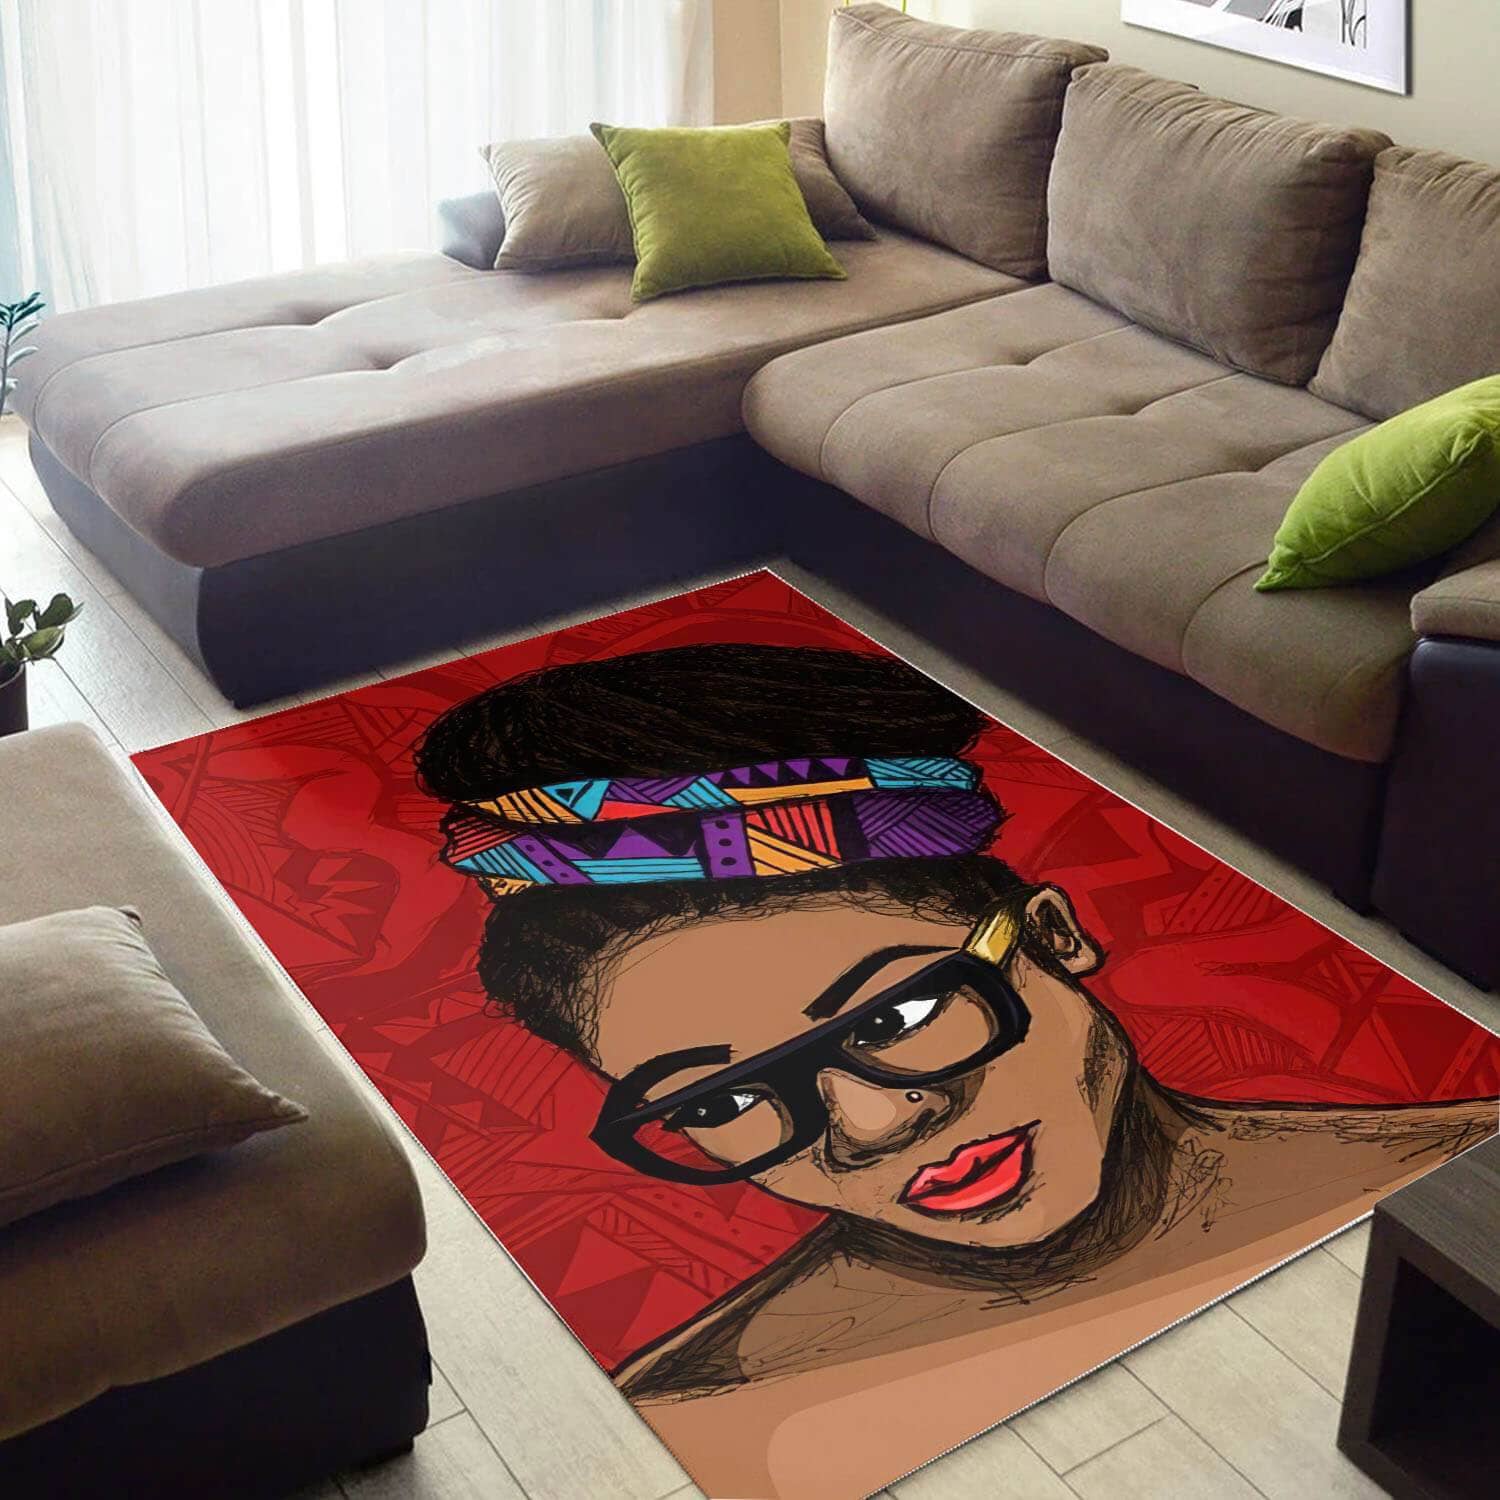 Afrocentric Beautiful Melanin Afro Girl African Design Floor Themed Living Room Rug